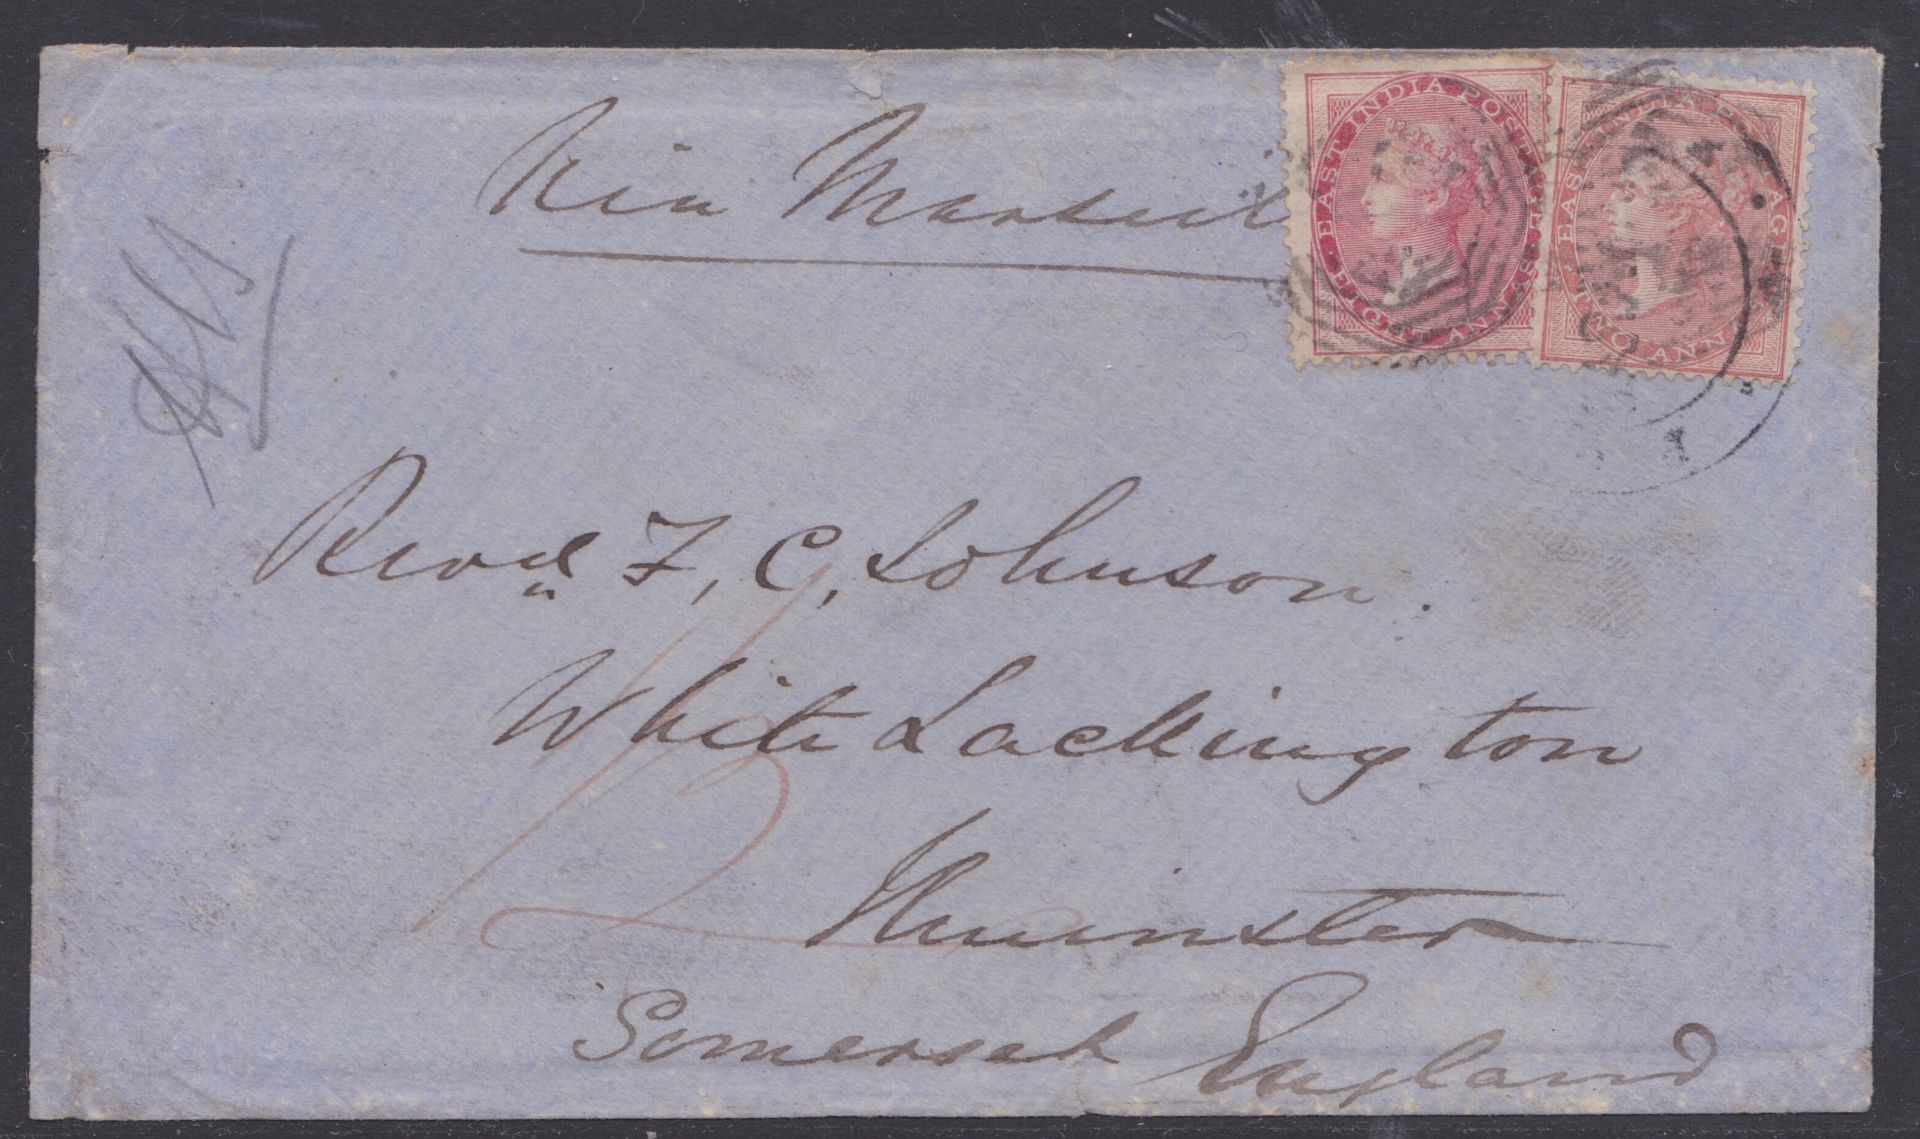 SARAWAK 1862 - Neat Blue Envelope to the Revd. F.C. Johnson in Somerset, franked by 1856-64 2a